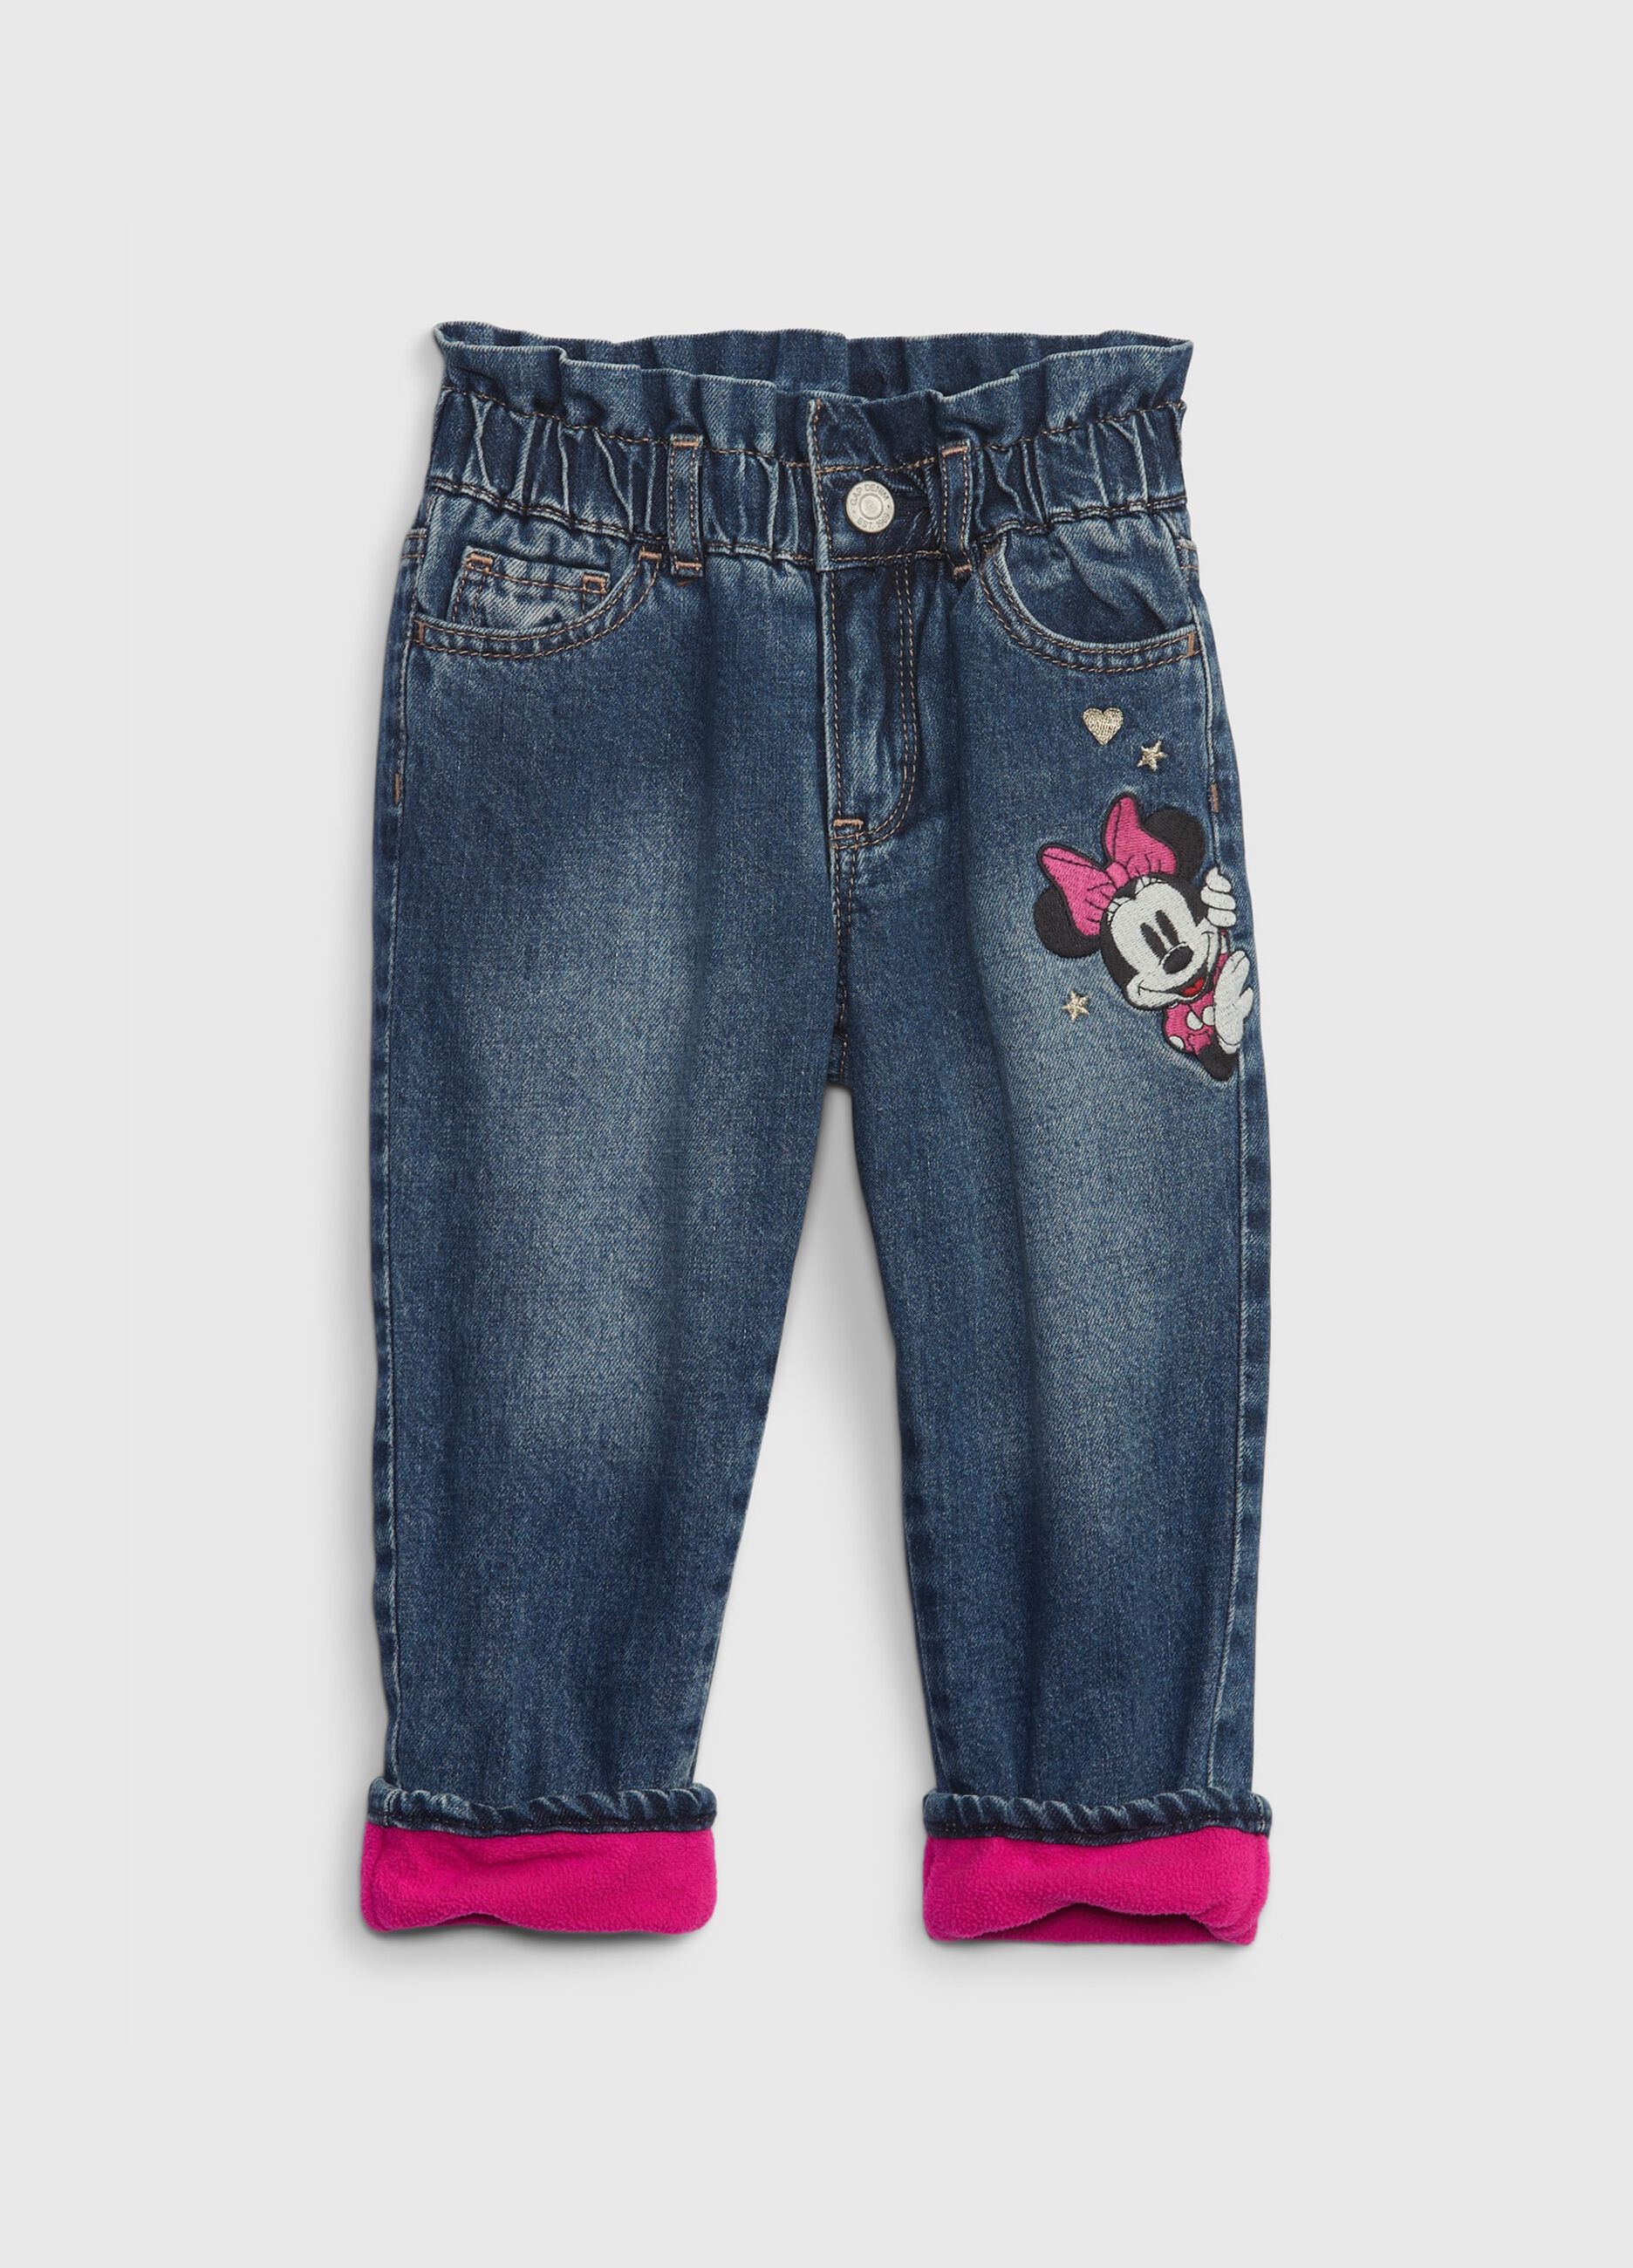 Mum-fit jeans with Disney Minnie Mouse patch